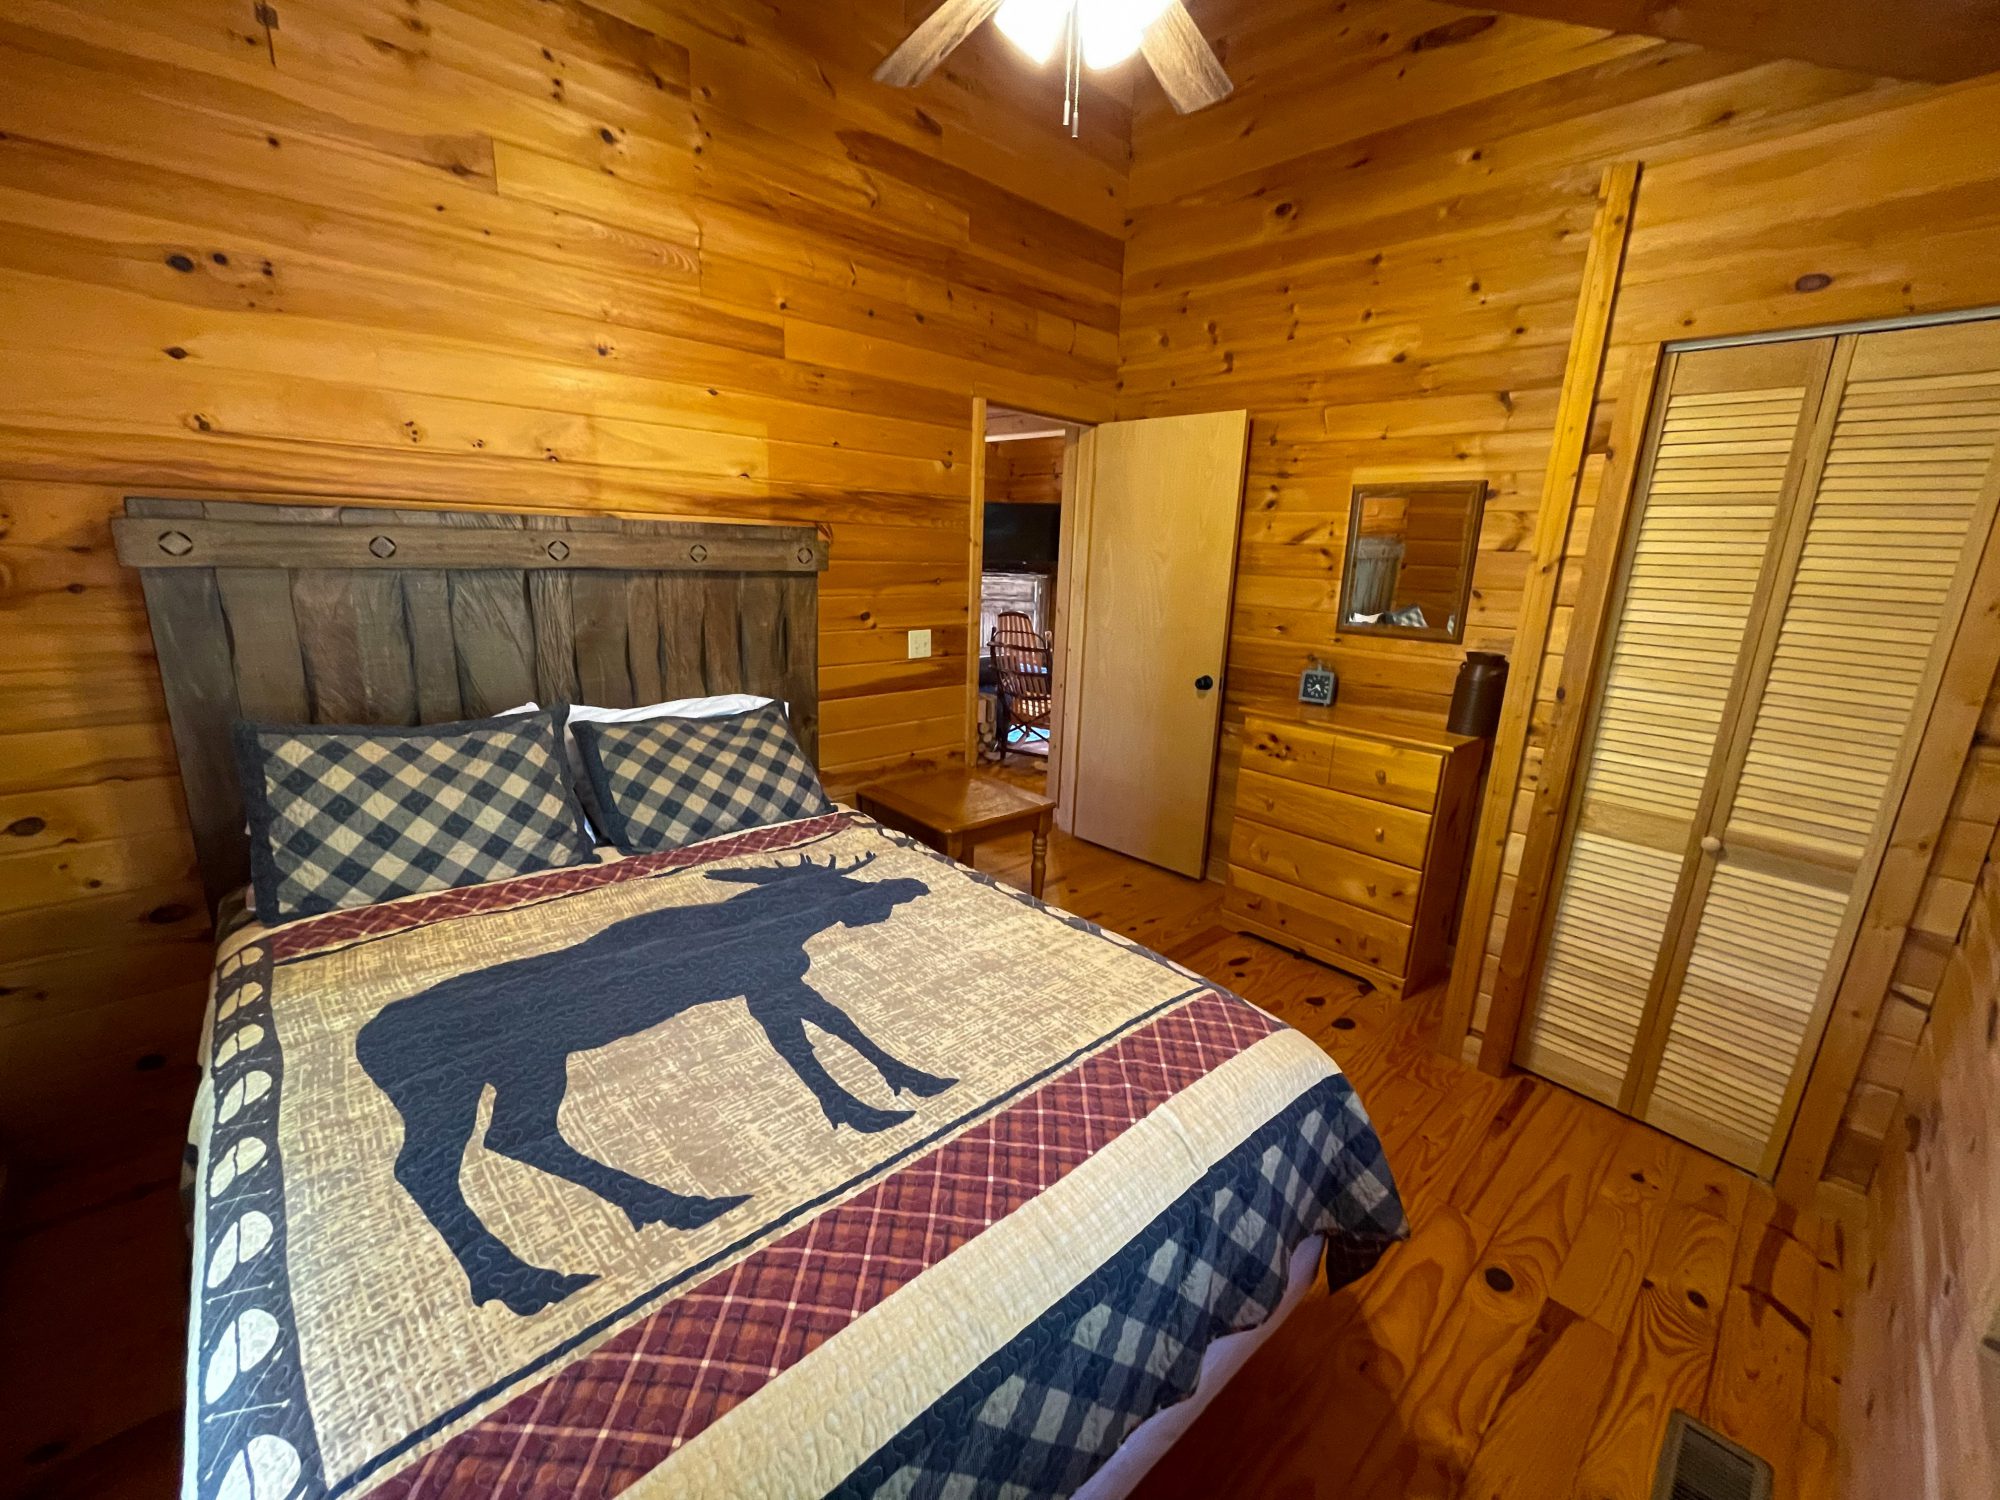 Soaring Eagle Cabin Rental in the Smoky Mountains